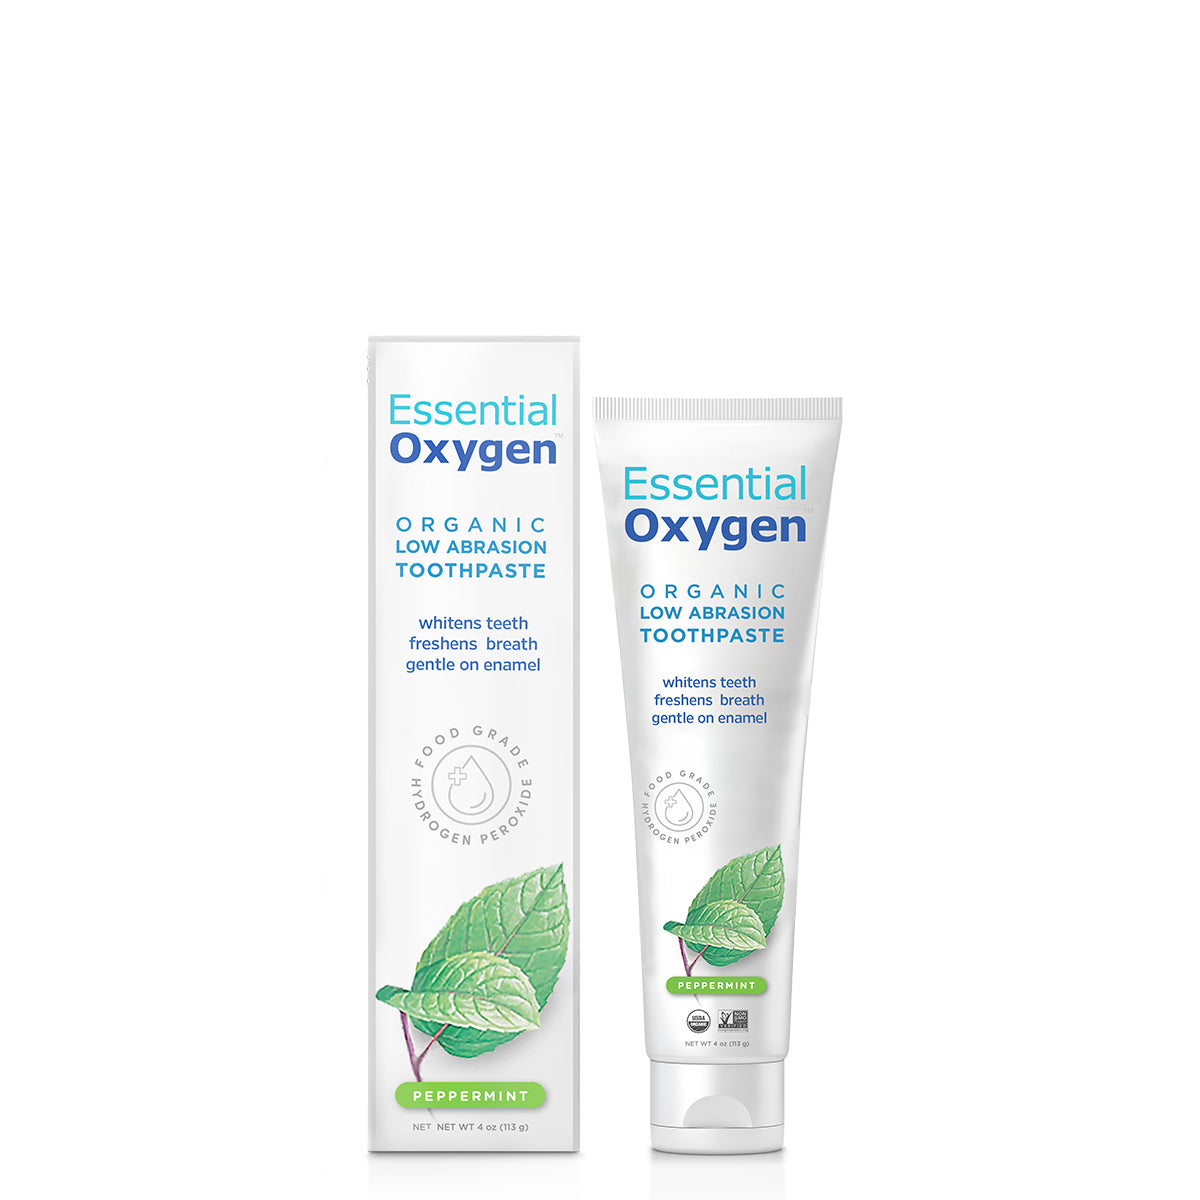 Organic Low Abrasion Toothpaste | Peppermint